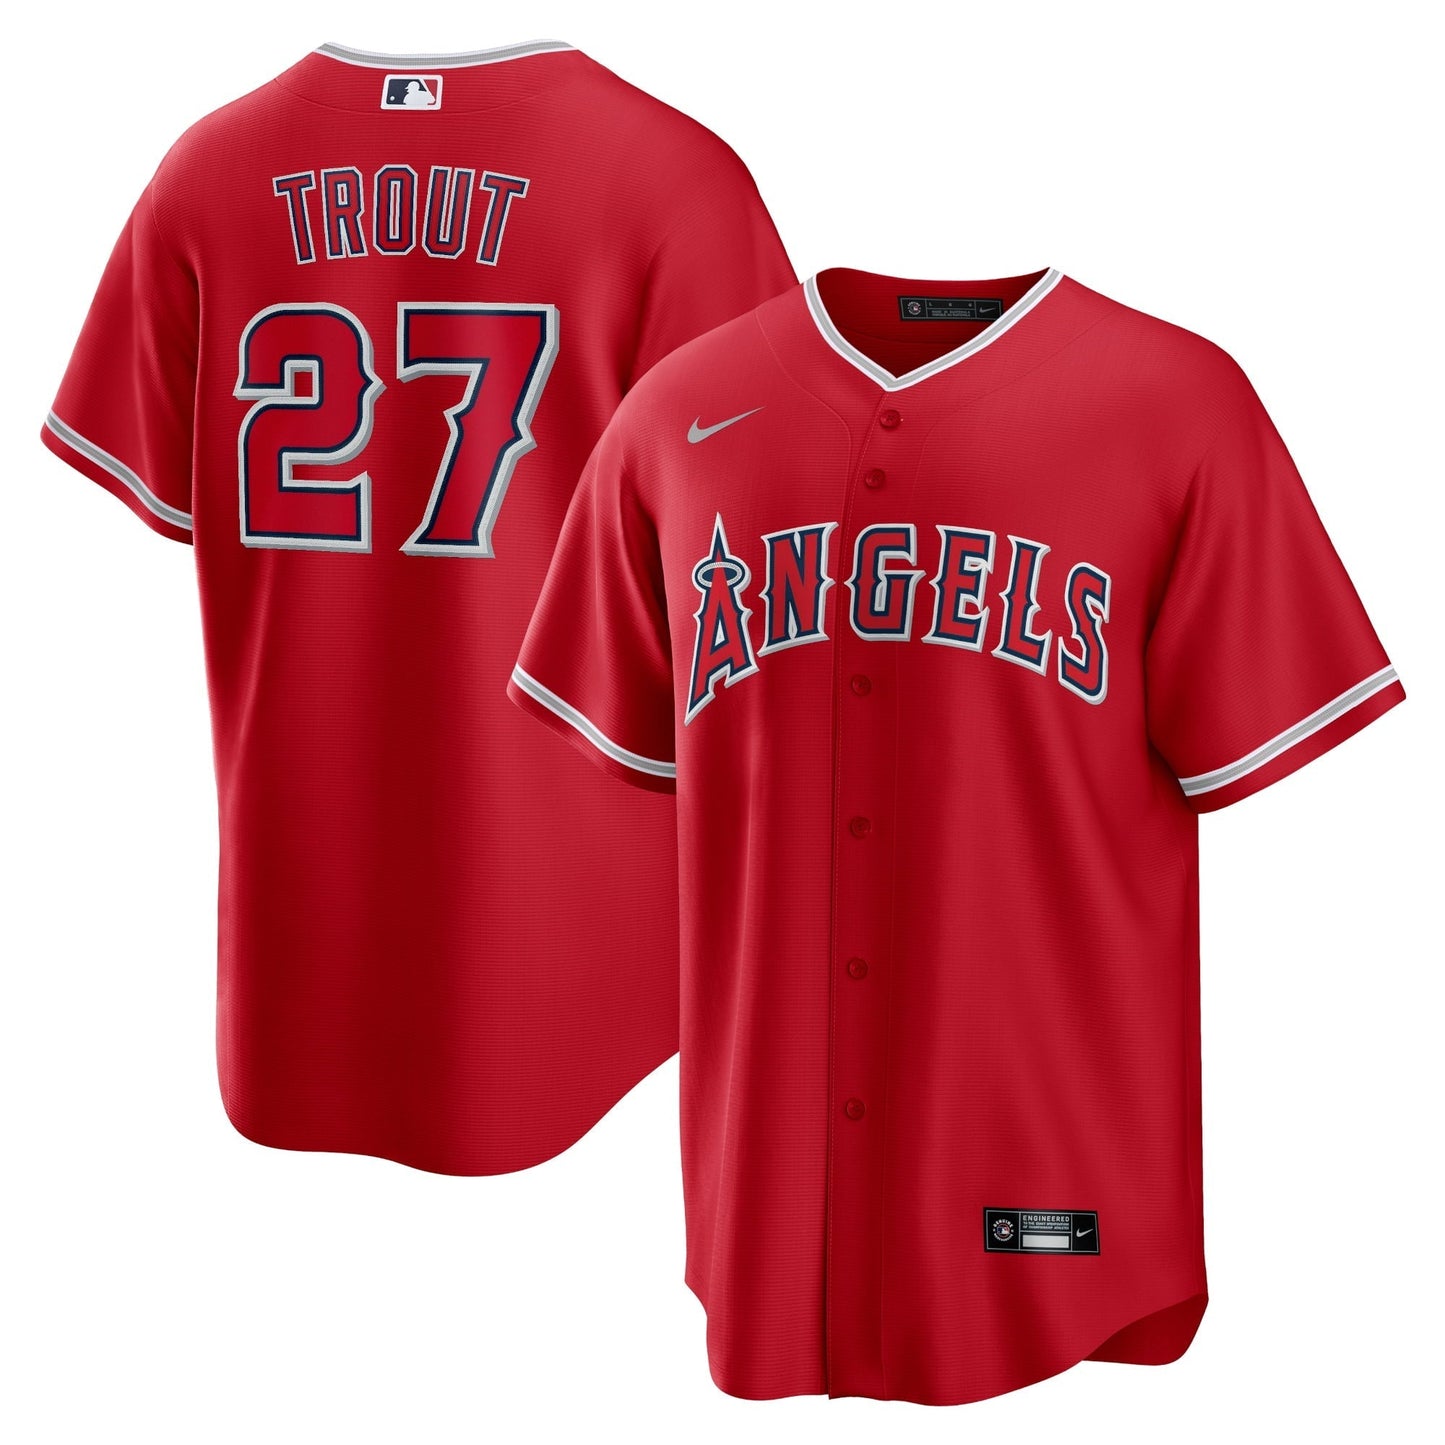 Men's Nike Mike Trout Red Los Angeles Angels Alternate Replica Player Name Jersey